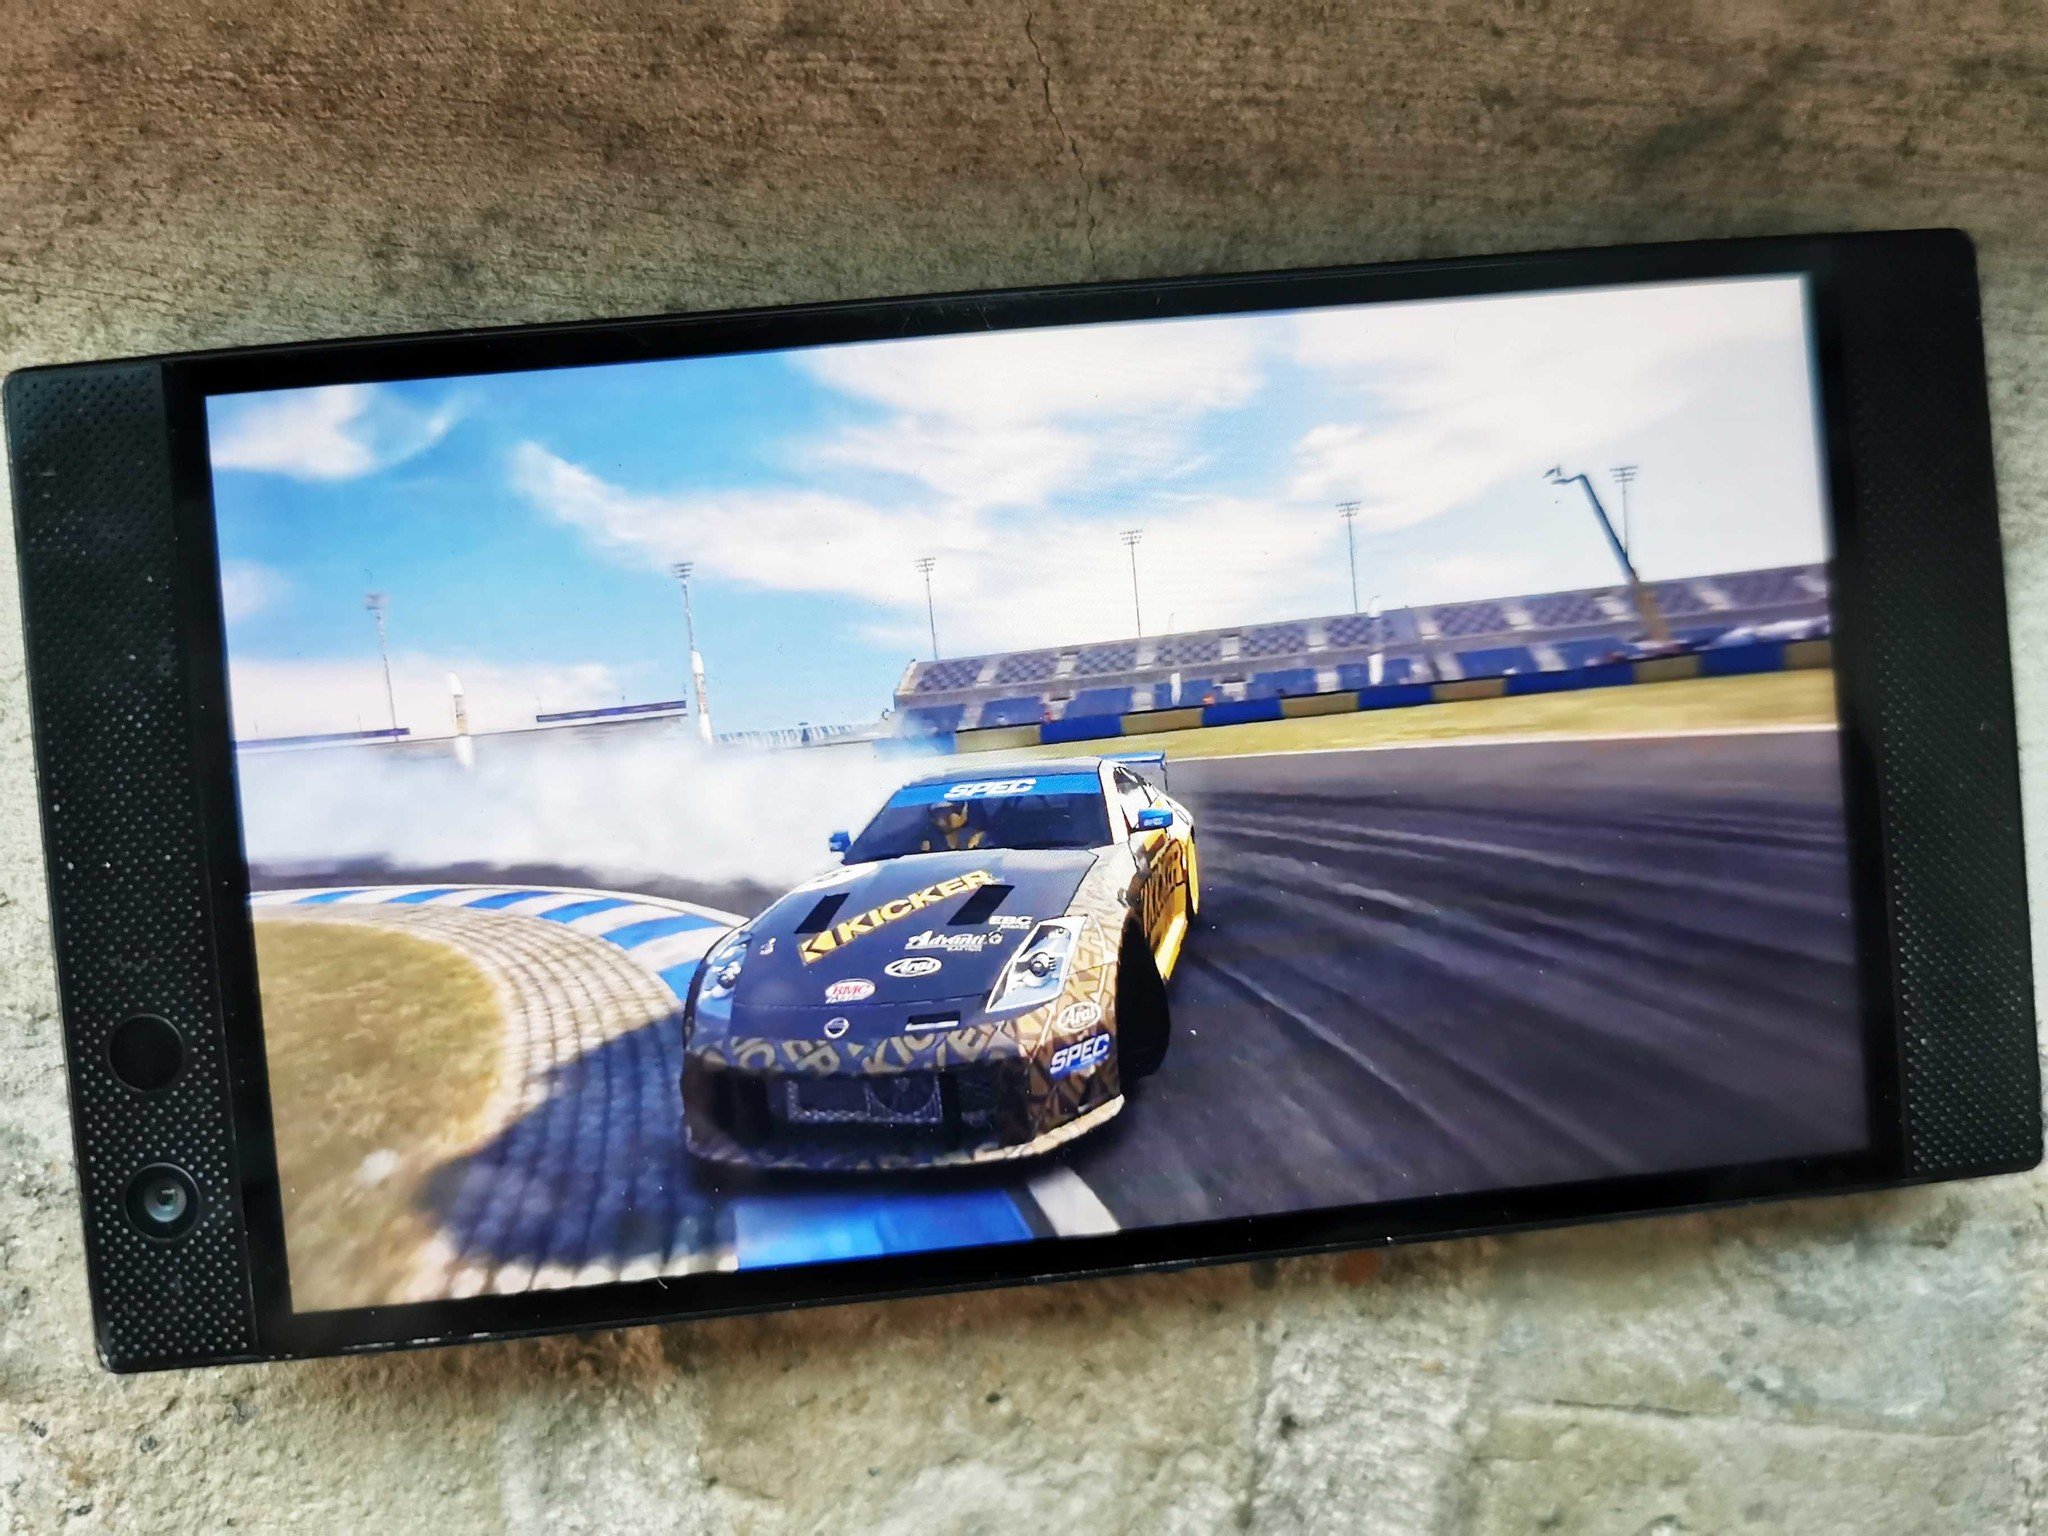 Best racing games for Android 2021